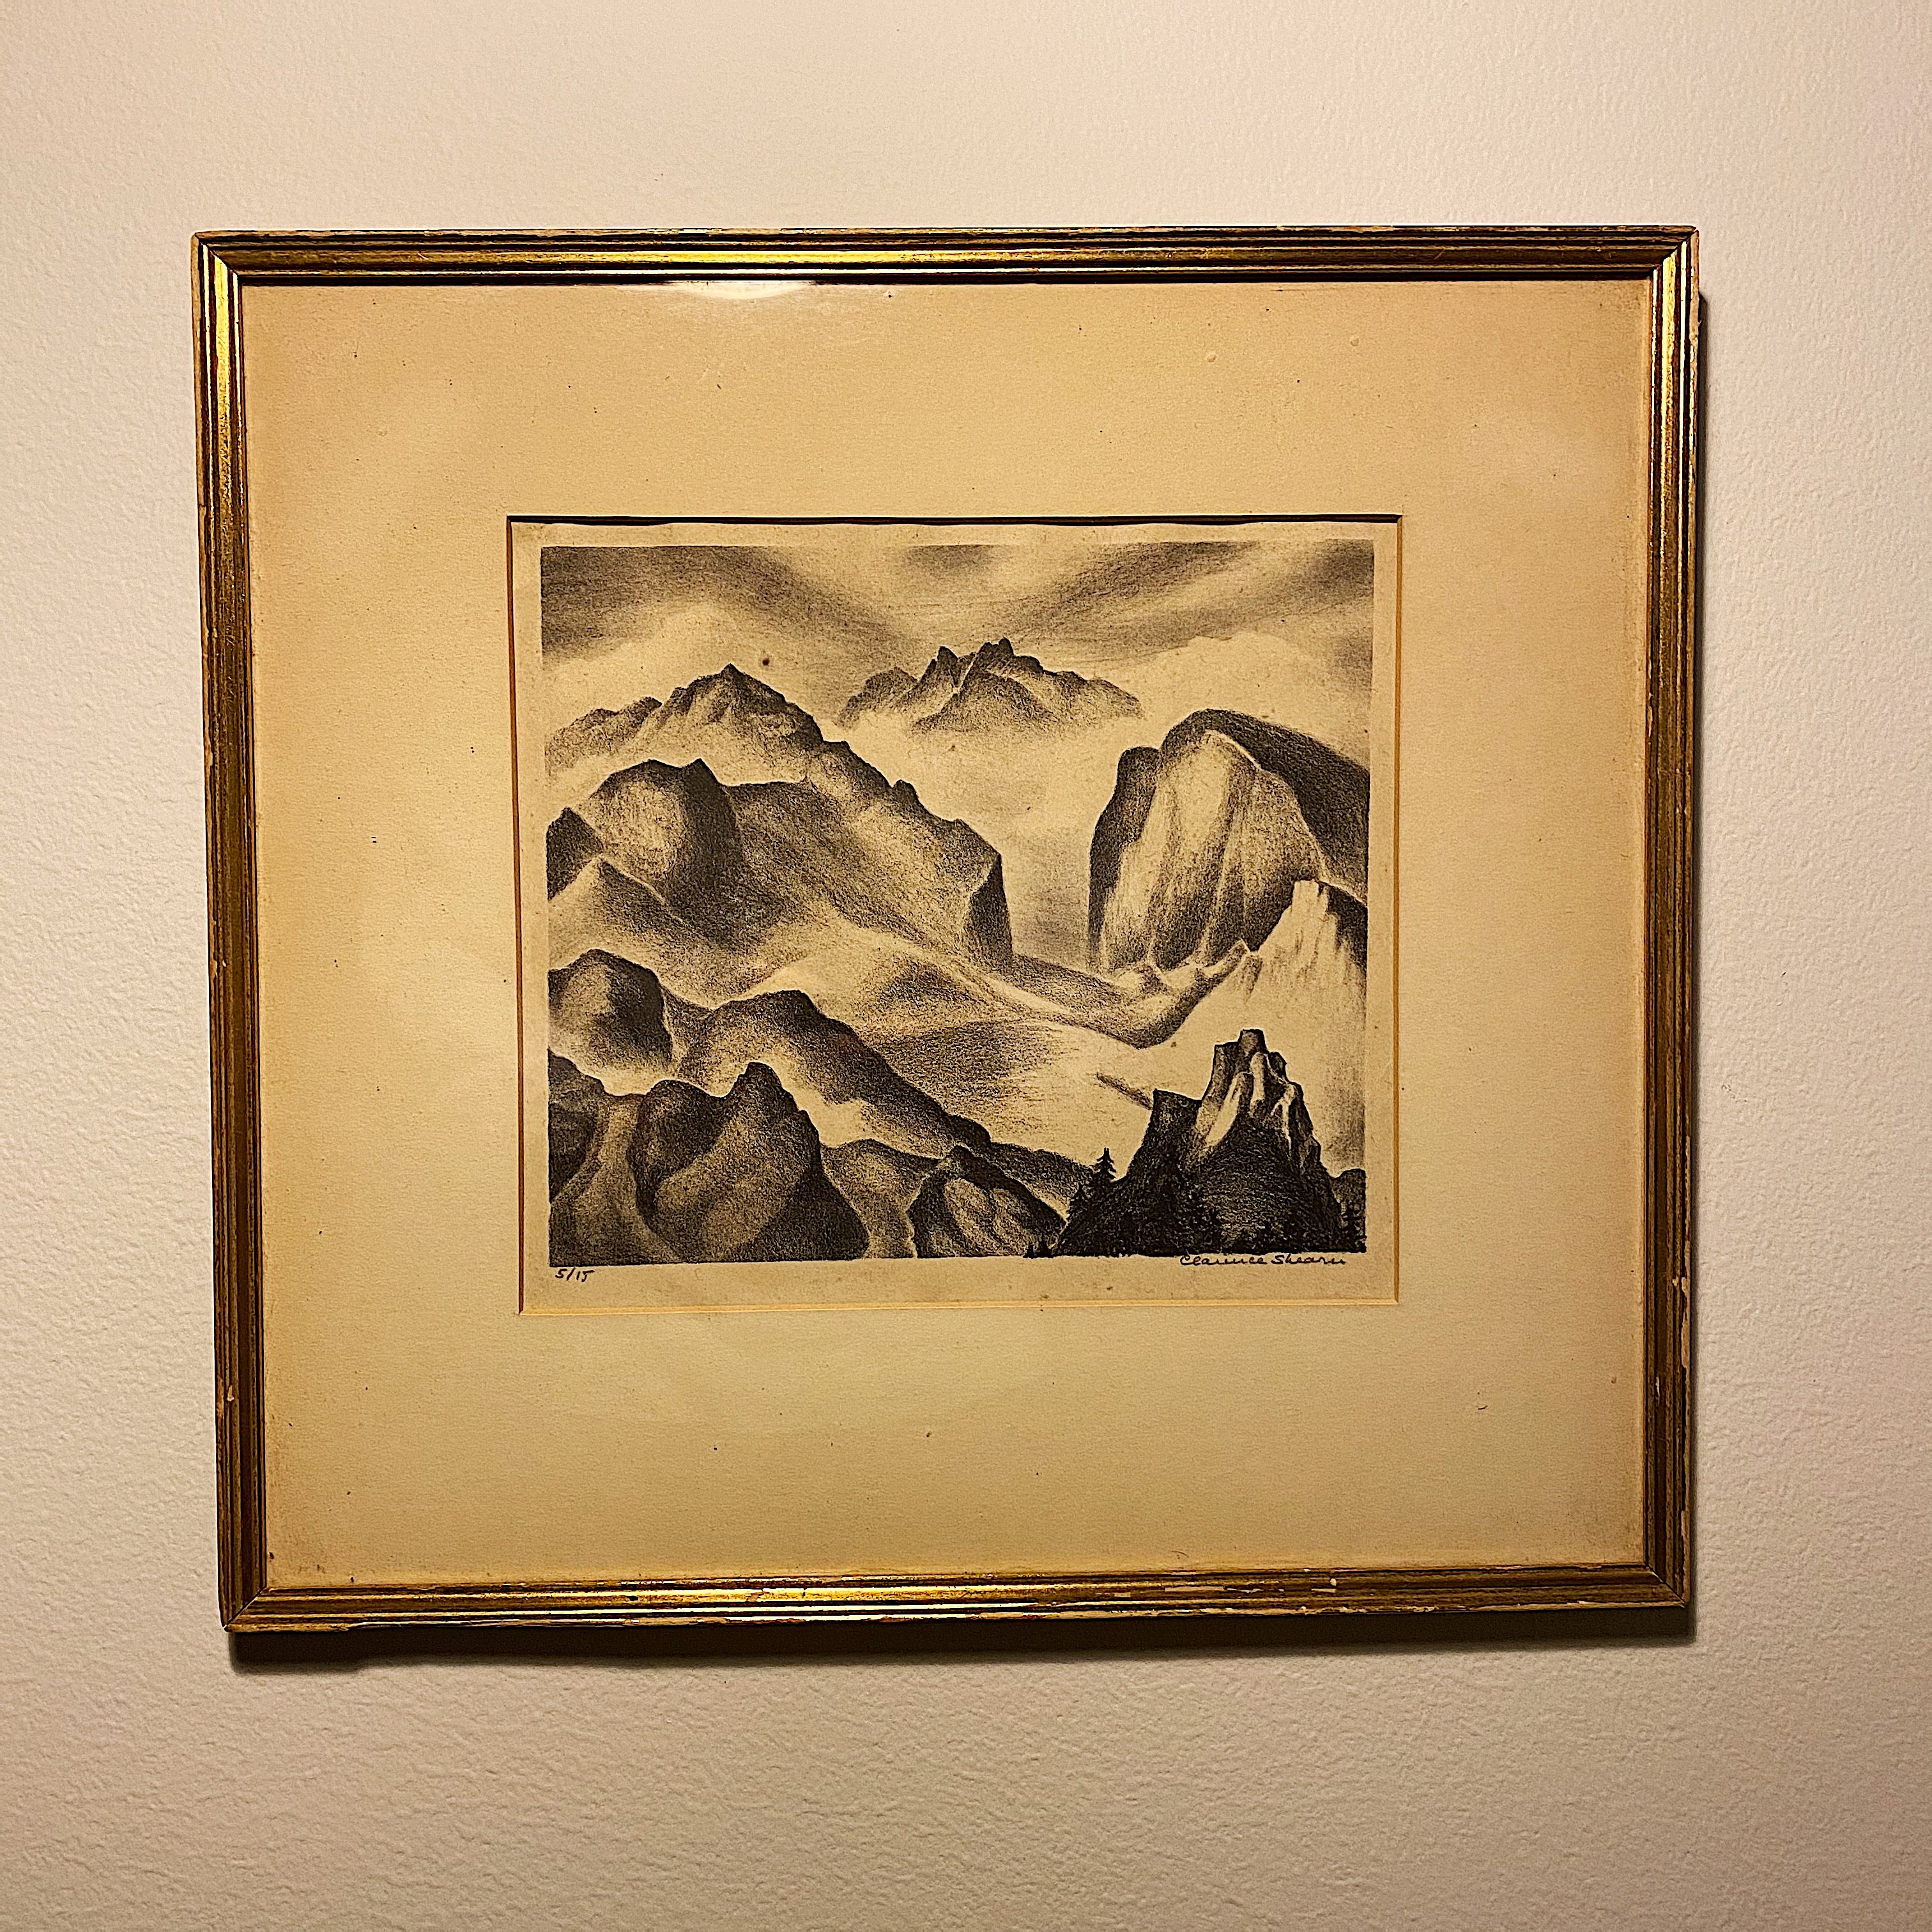 Rare Rare WPA Era Print by Clarence Shearn of Mountain Range- Limited Edition - 5 of 15 - 1930s WPA Artwork - Signed Lithograph Art